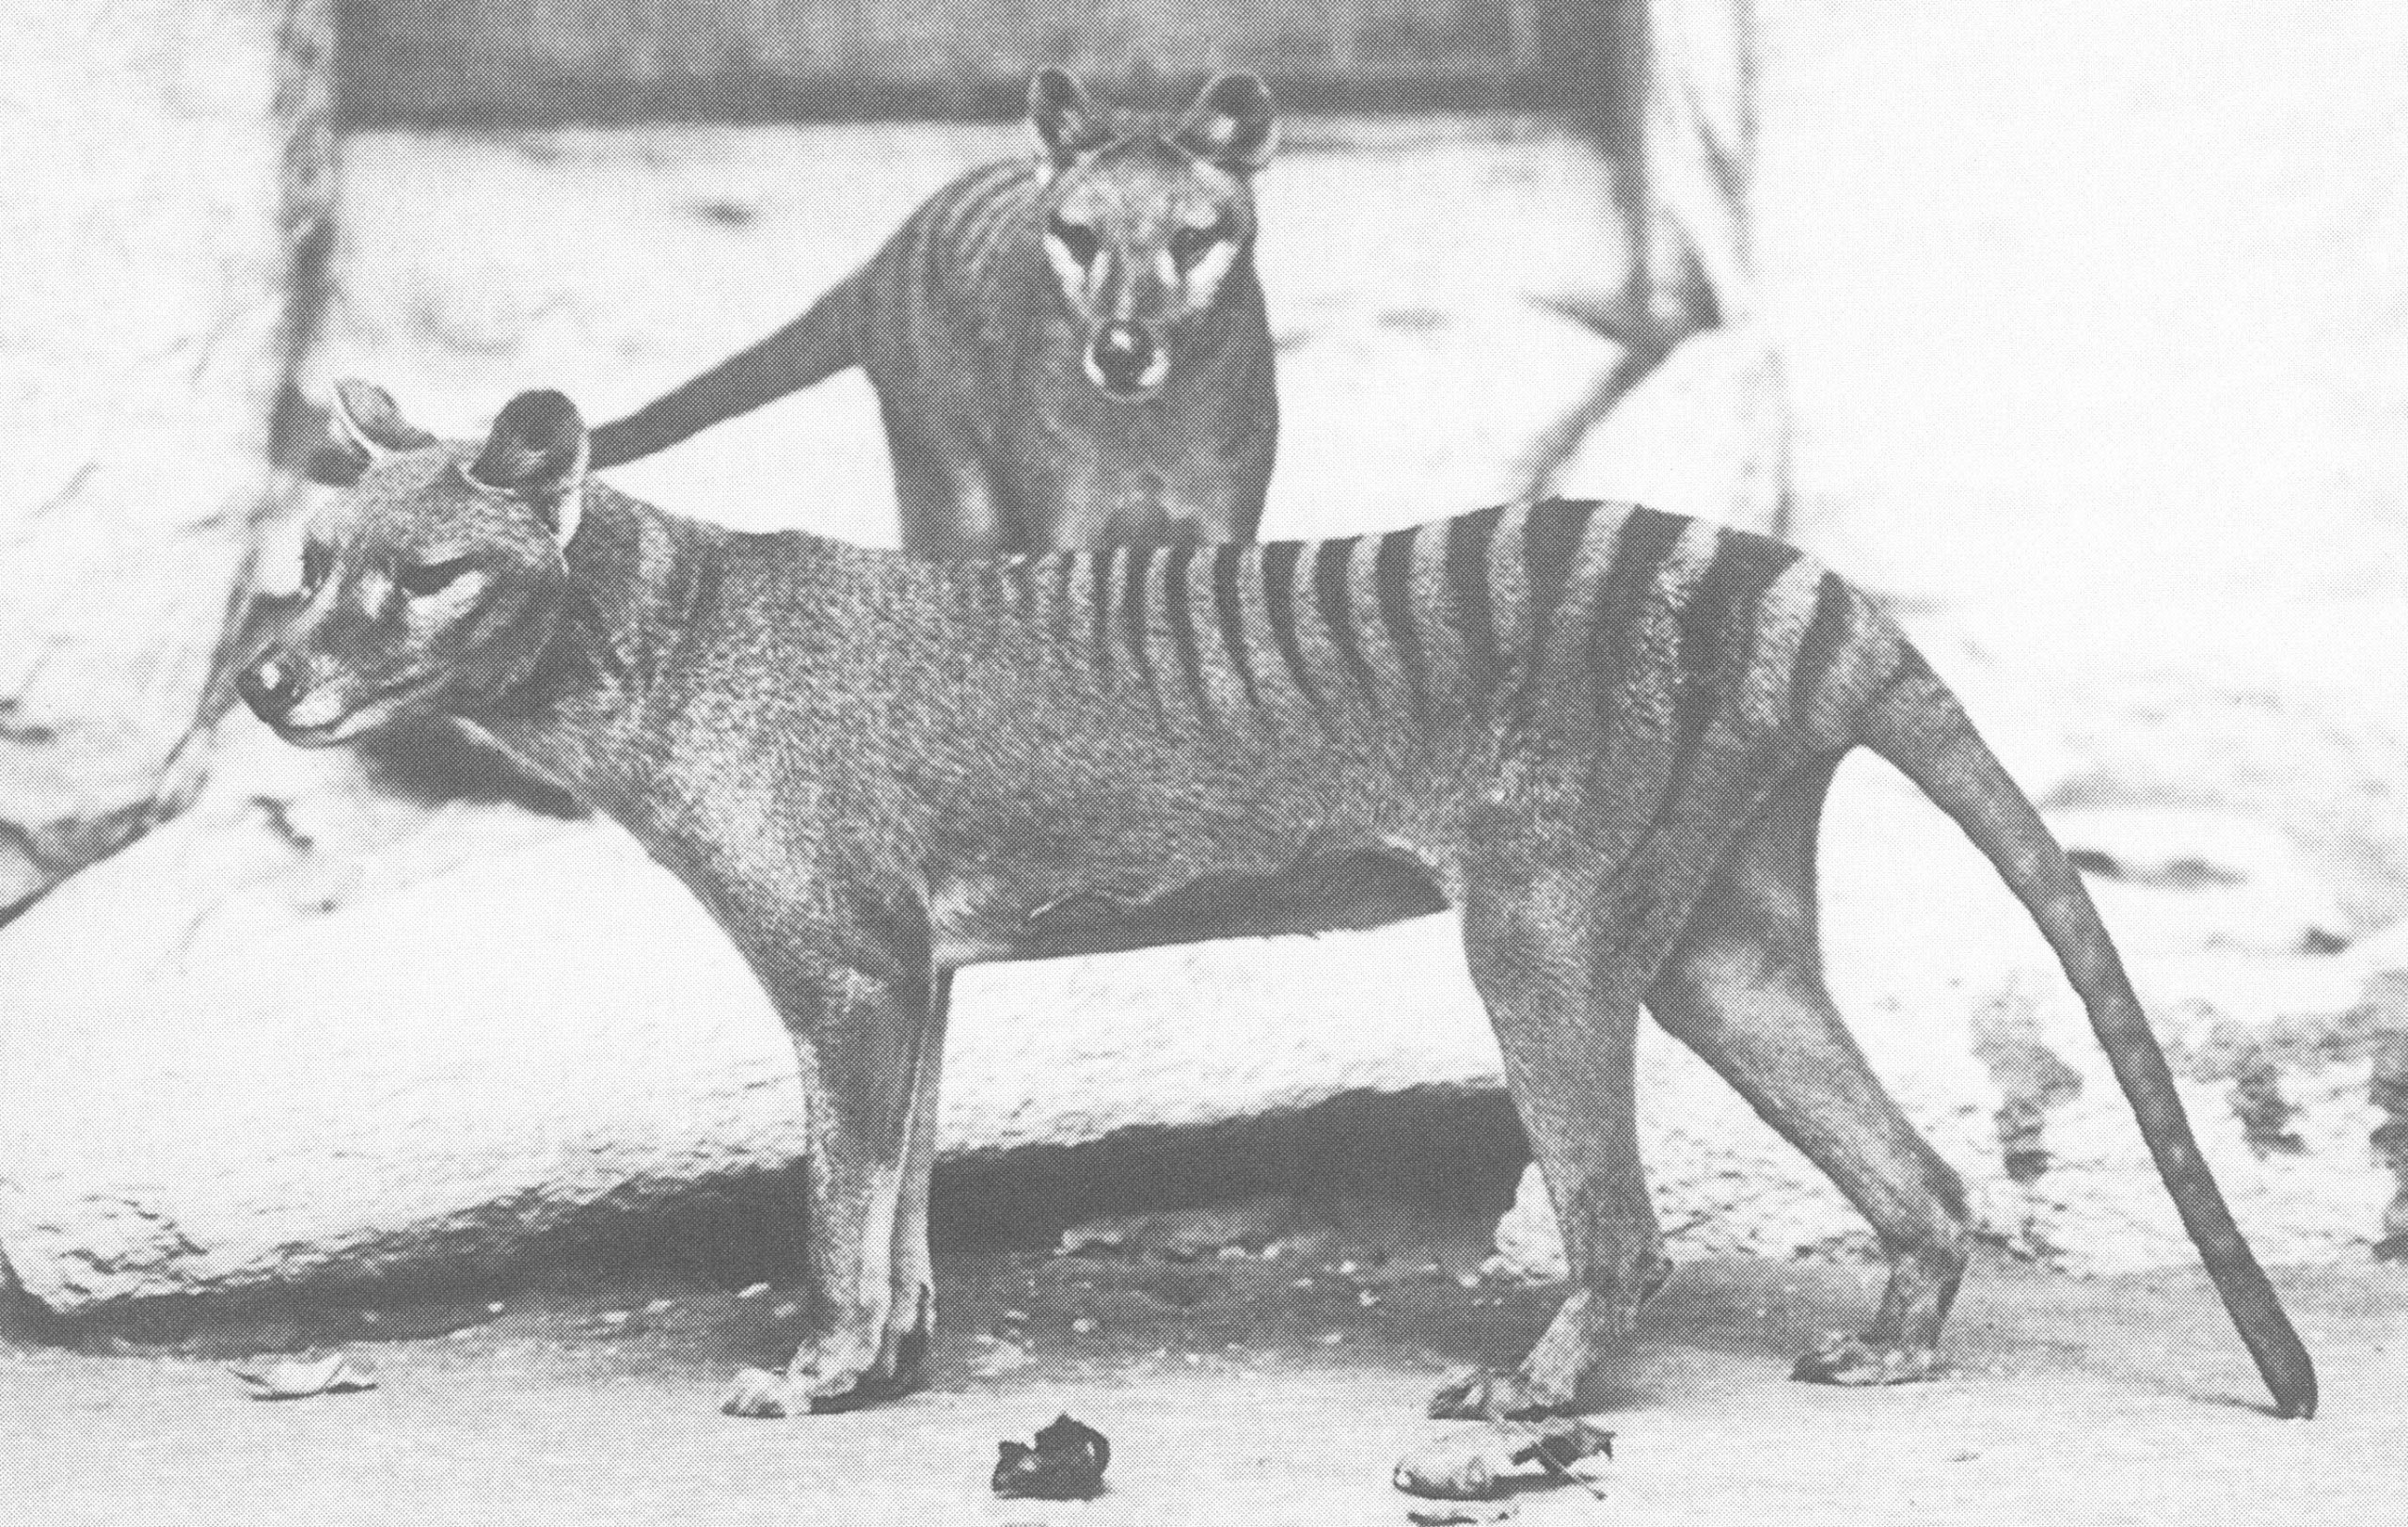 A male and female thylacine at the National Zoo in Washington D.C., 1902. (Photo: E.J. Keller)